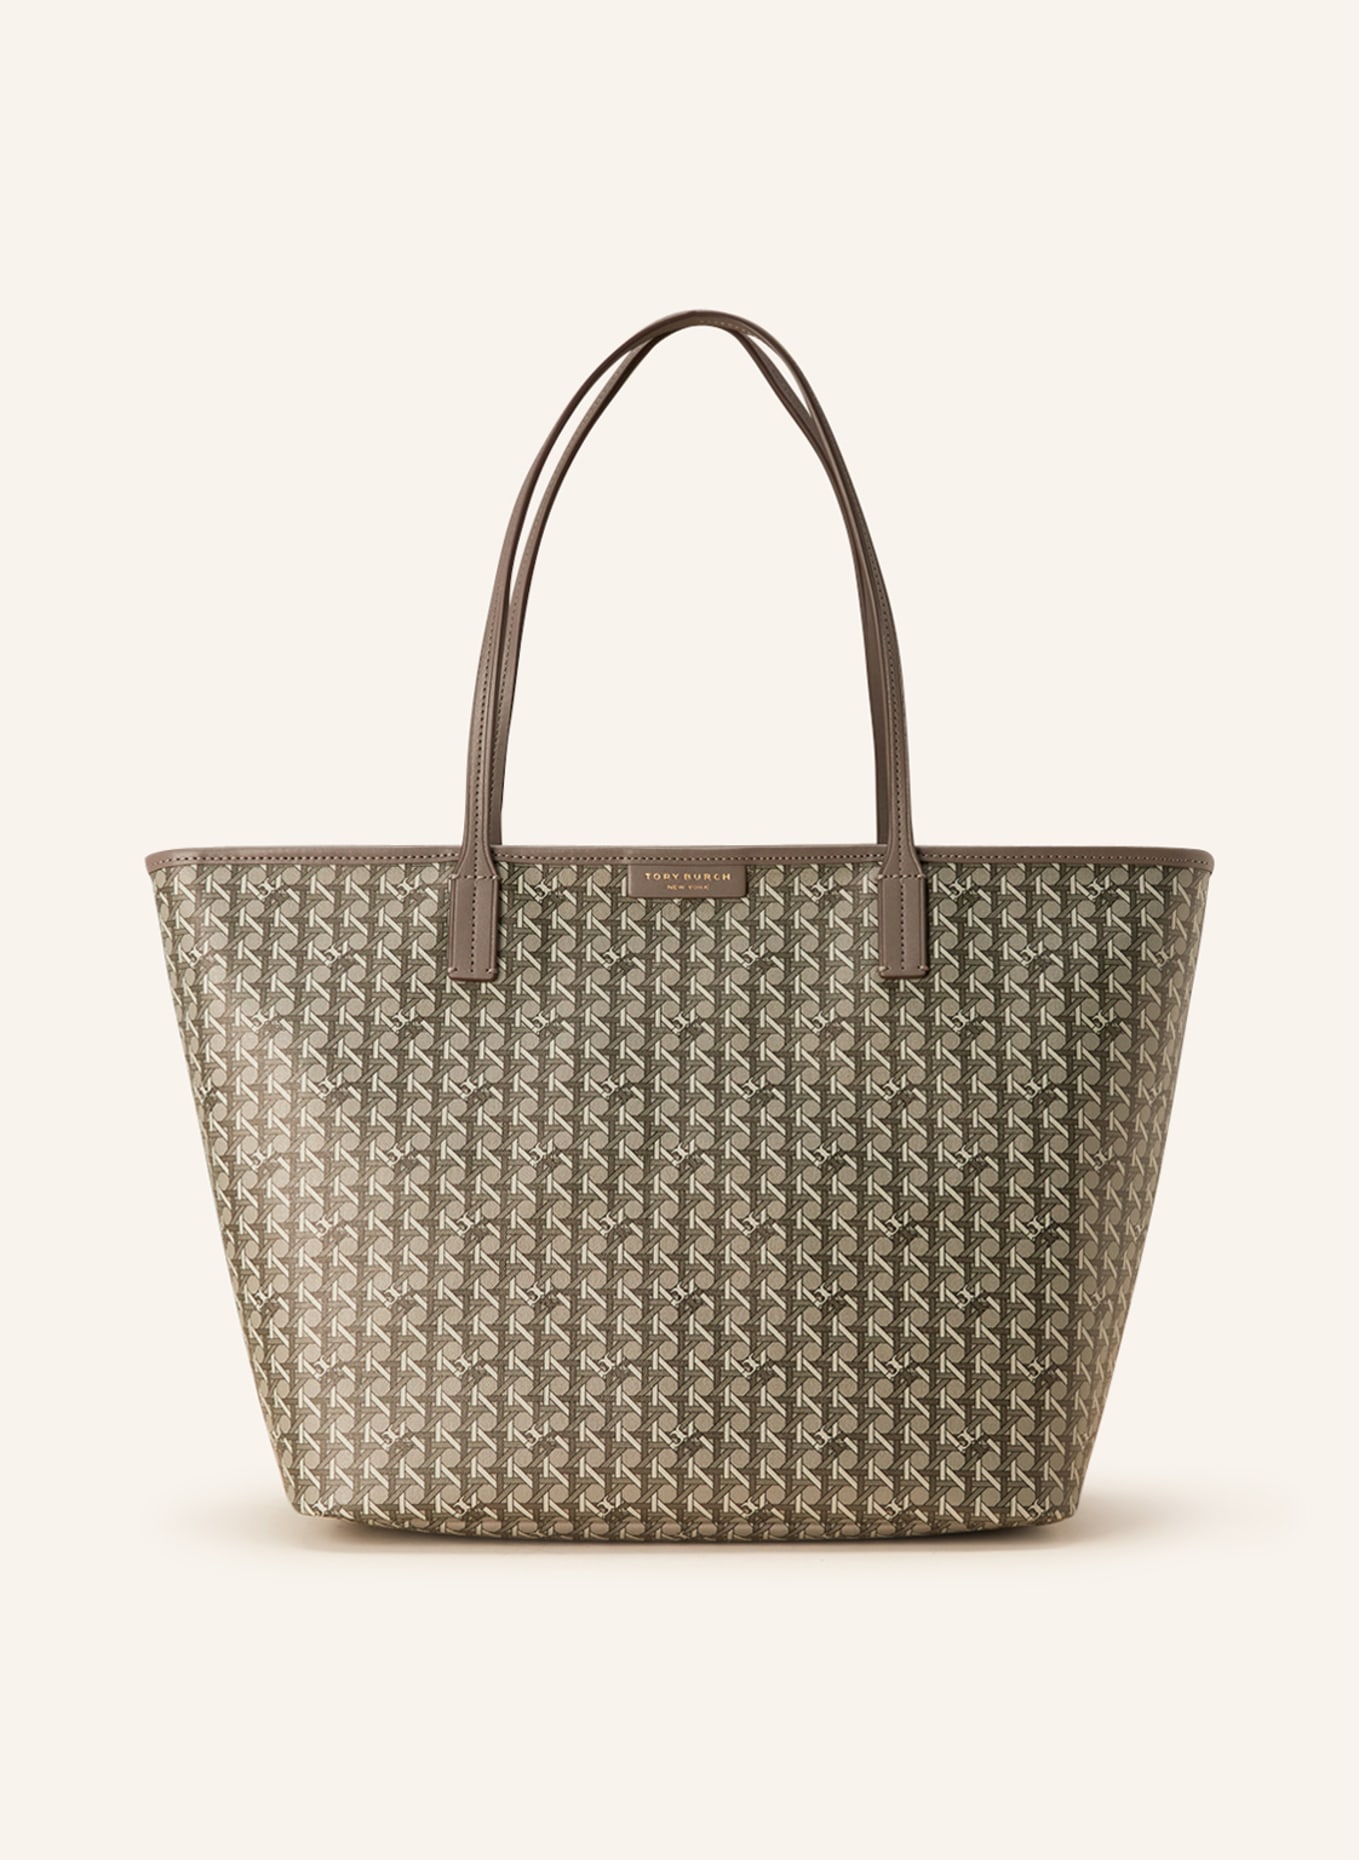 TORY BURCH Shopper EVER-READY TOTE BAG with pouch in gray